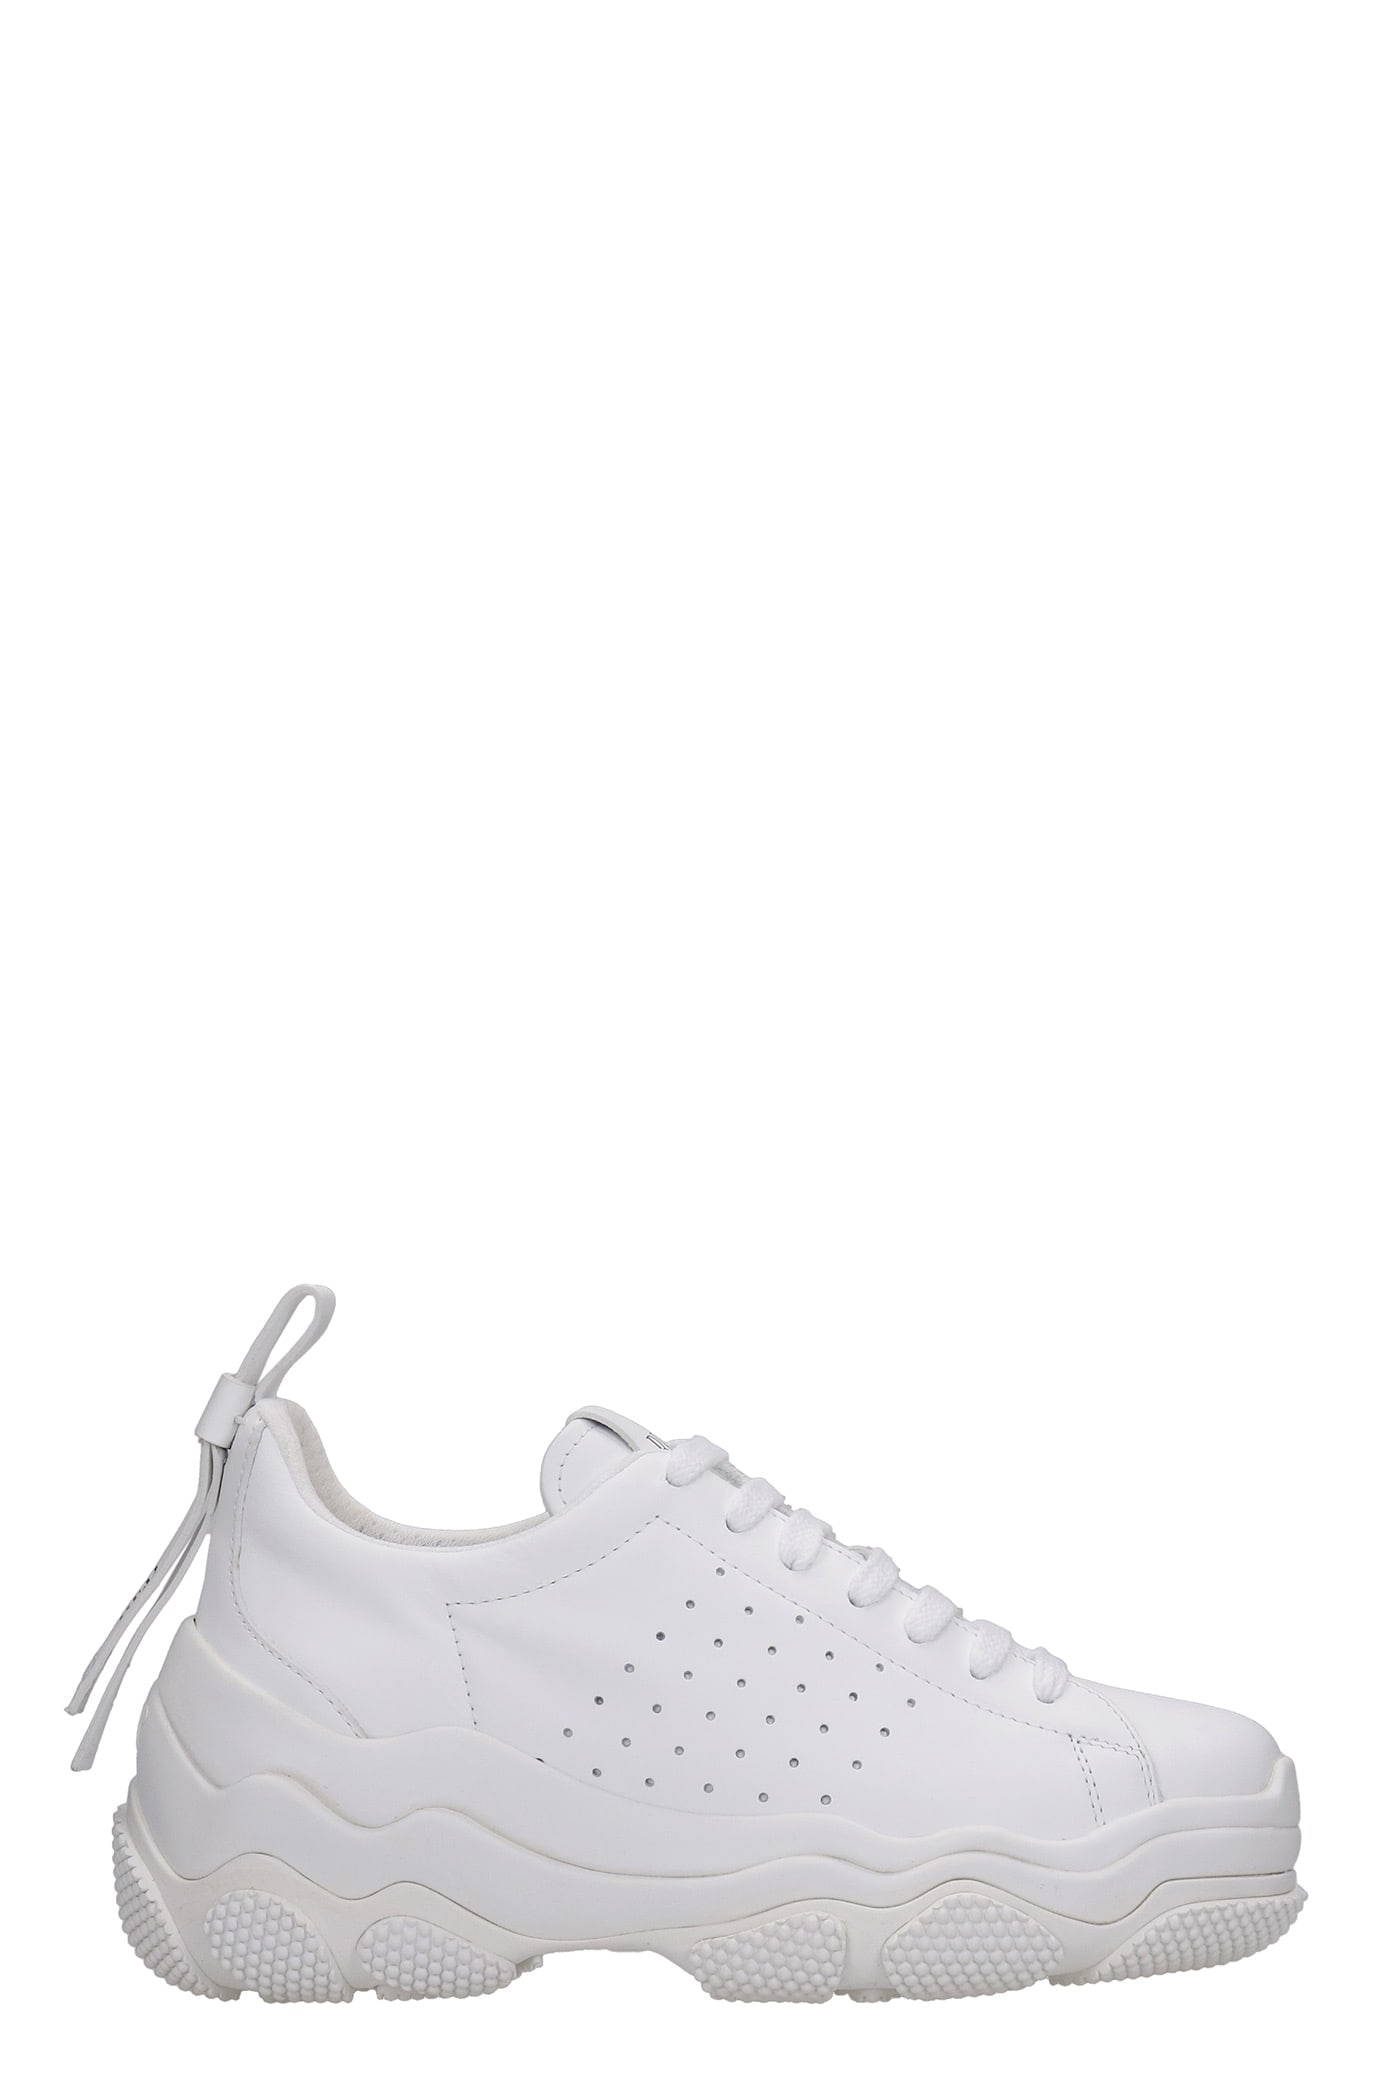 Buy RED Valentino Sneakers In White Leather online, shop RED Valentino shoes with free shipping